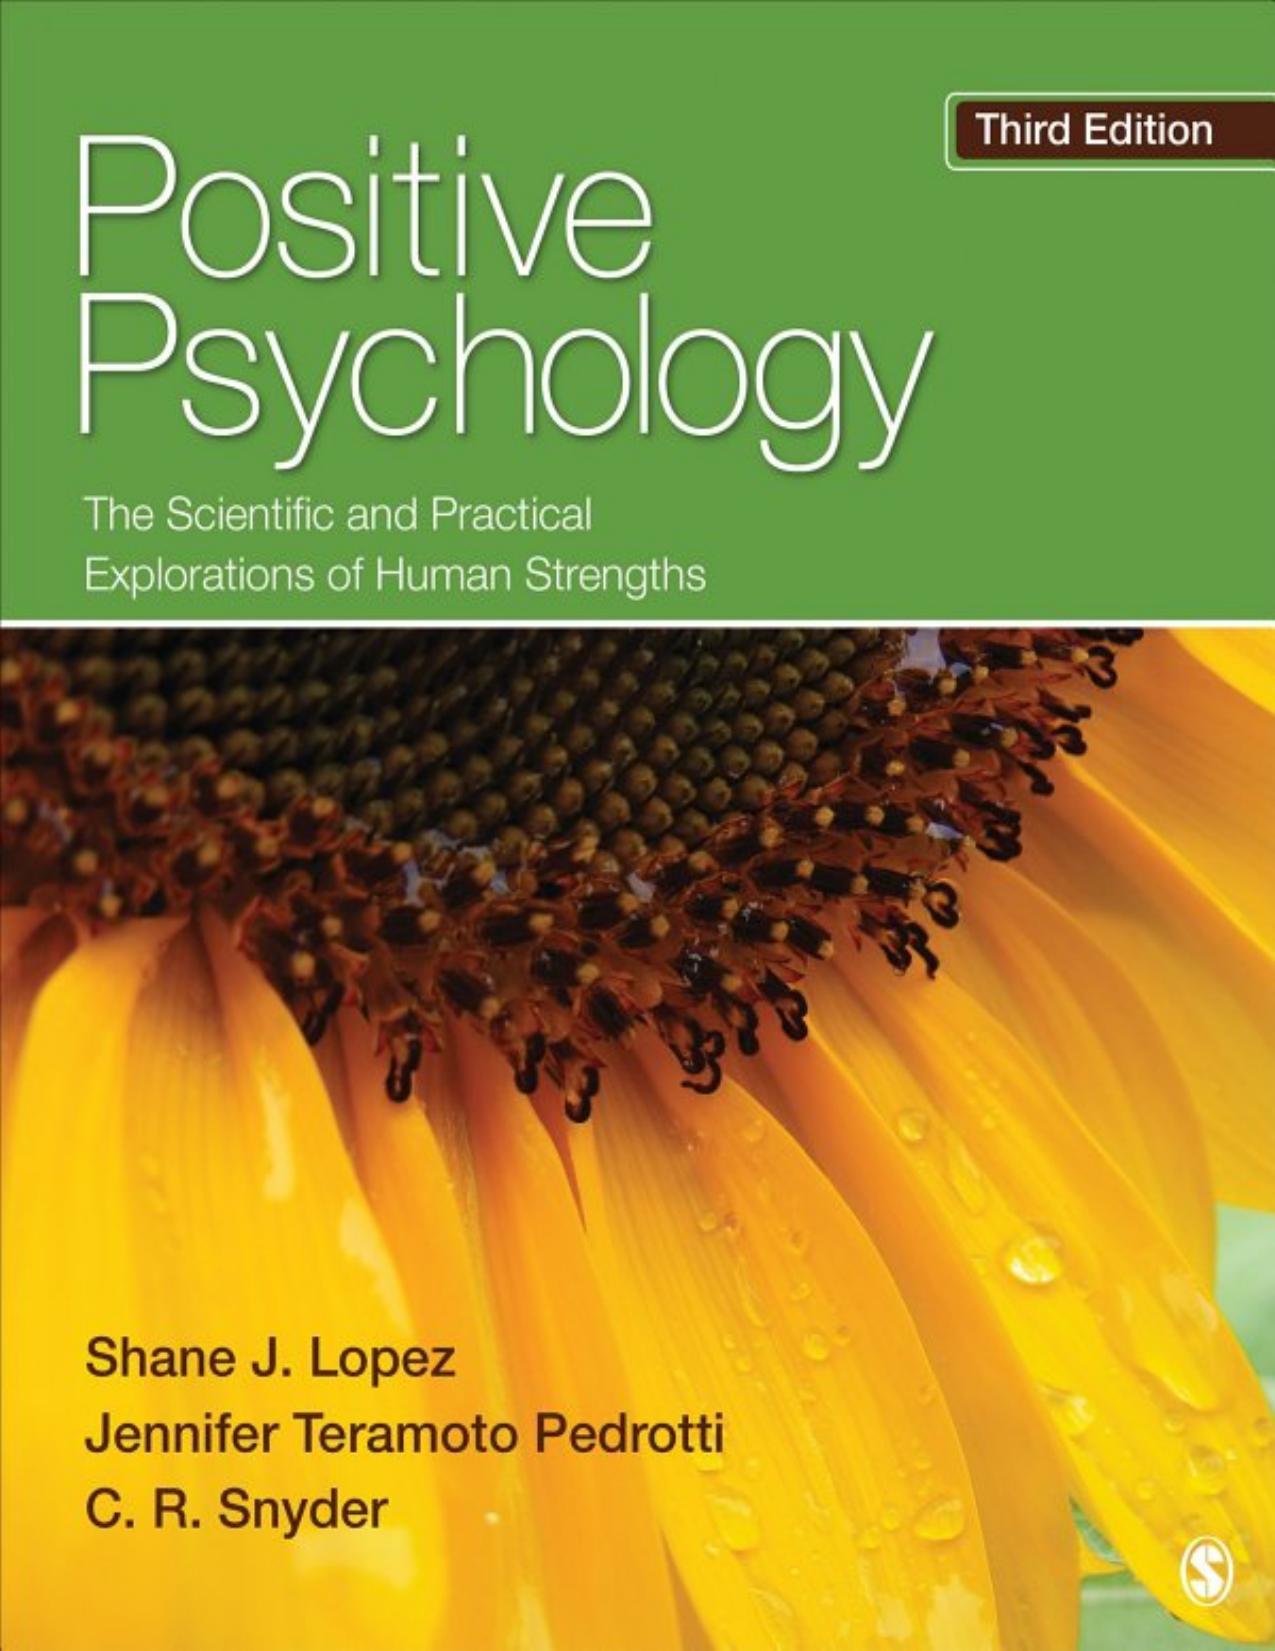 Positive Psychology_ The Scientific and Practical Exploratio 3rd.jpg